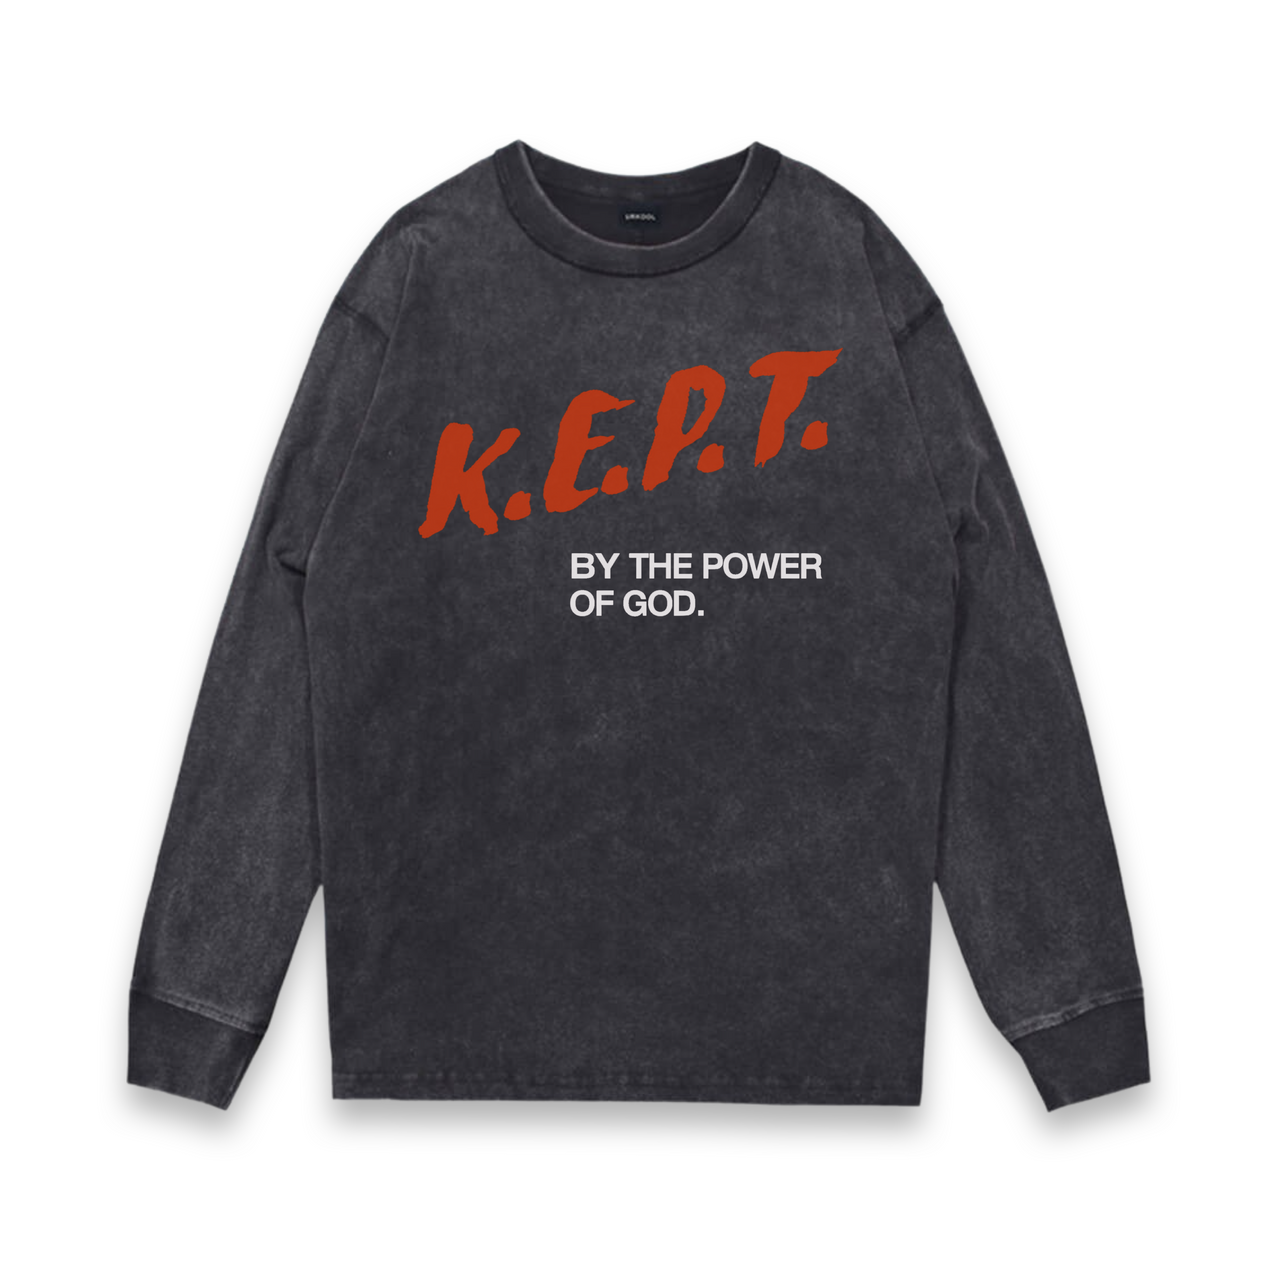 K.E.P.T By The Power of God - Vintage L/S